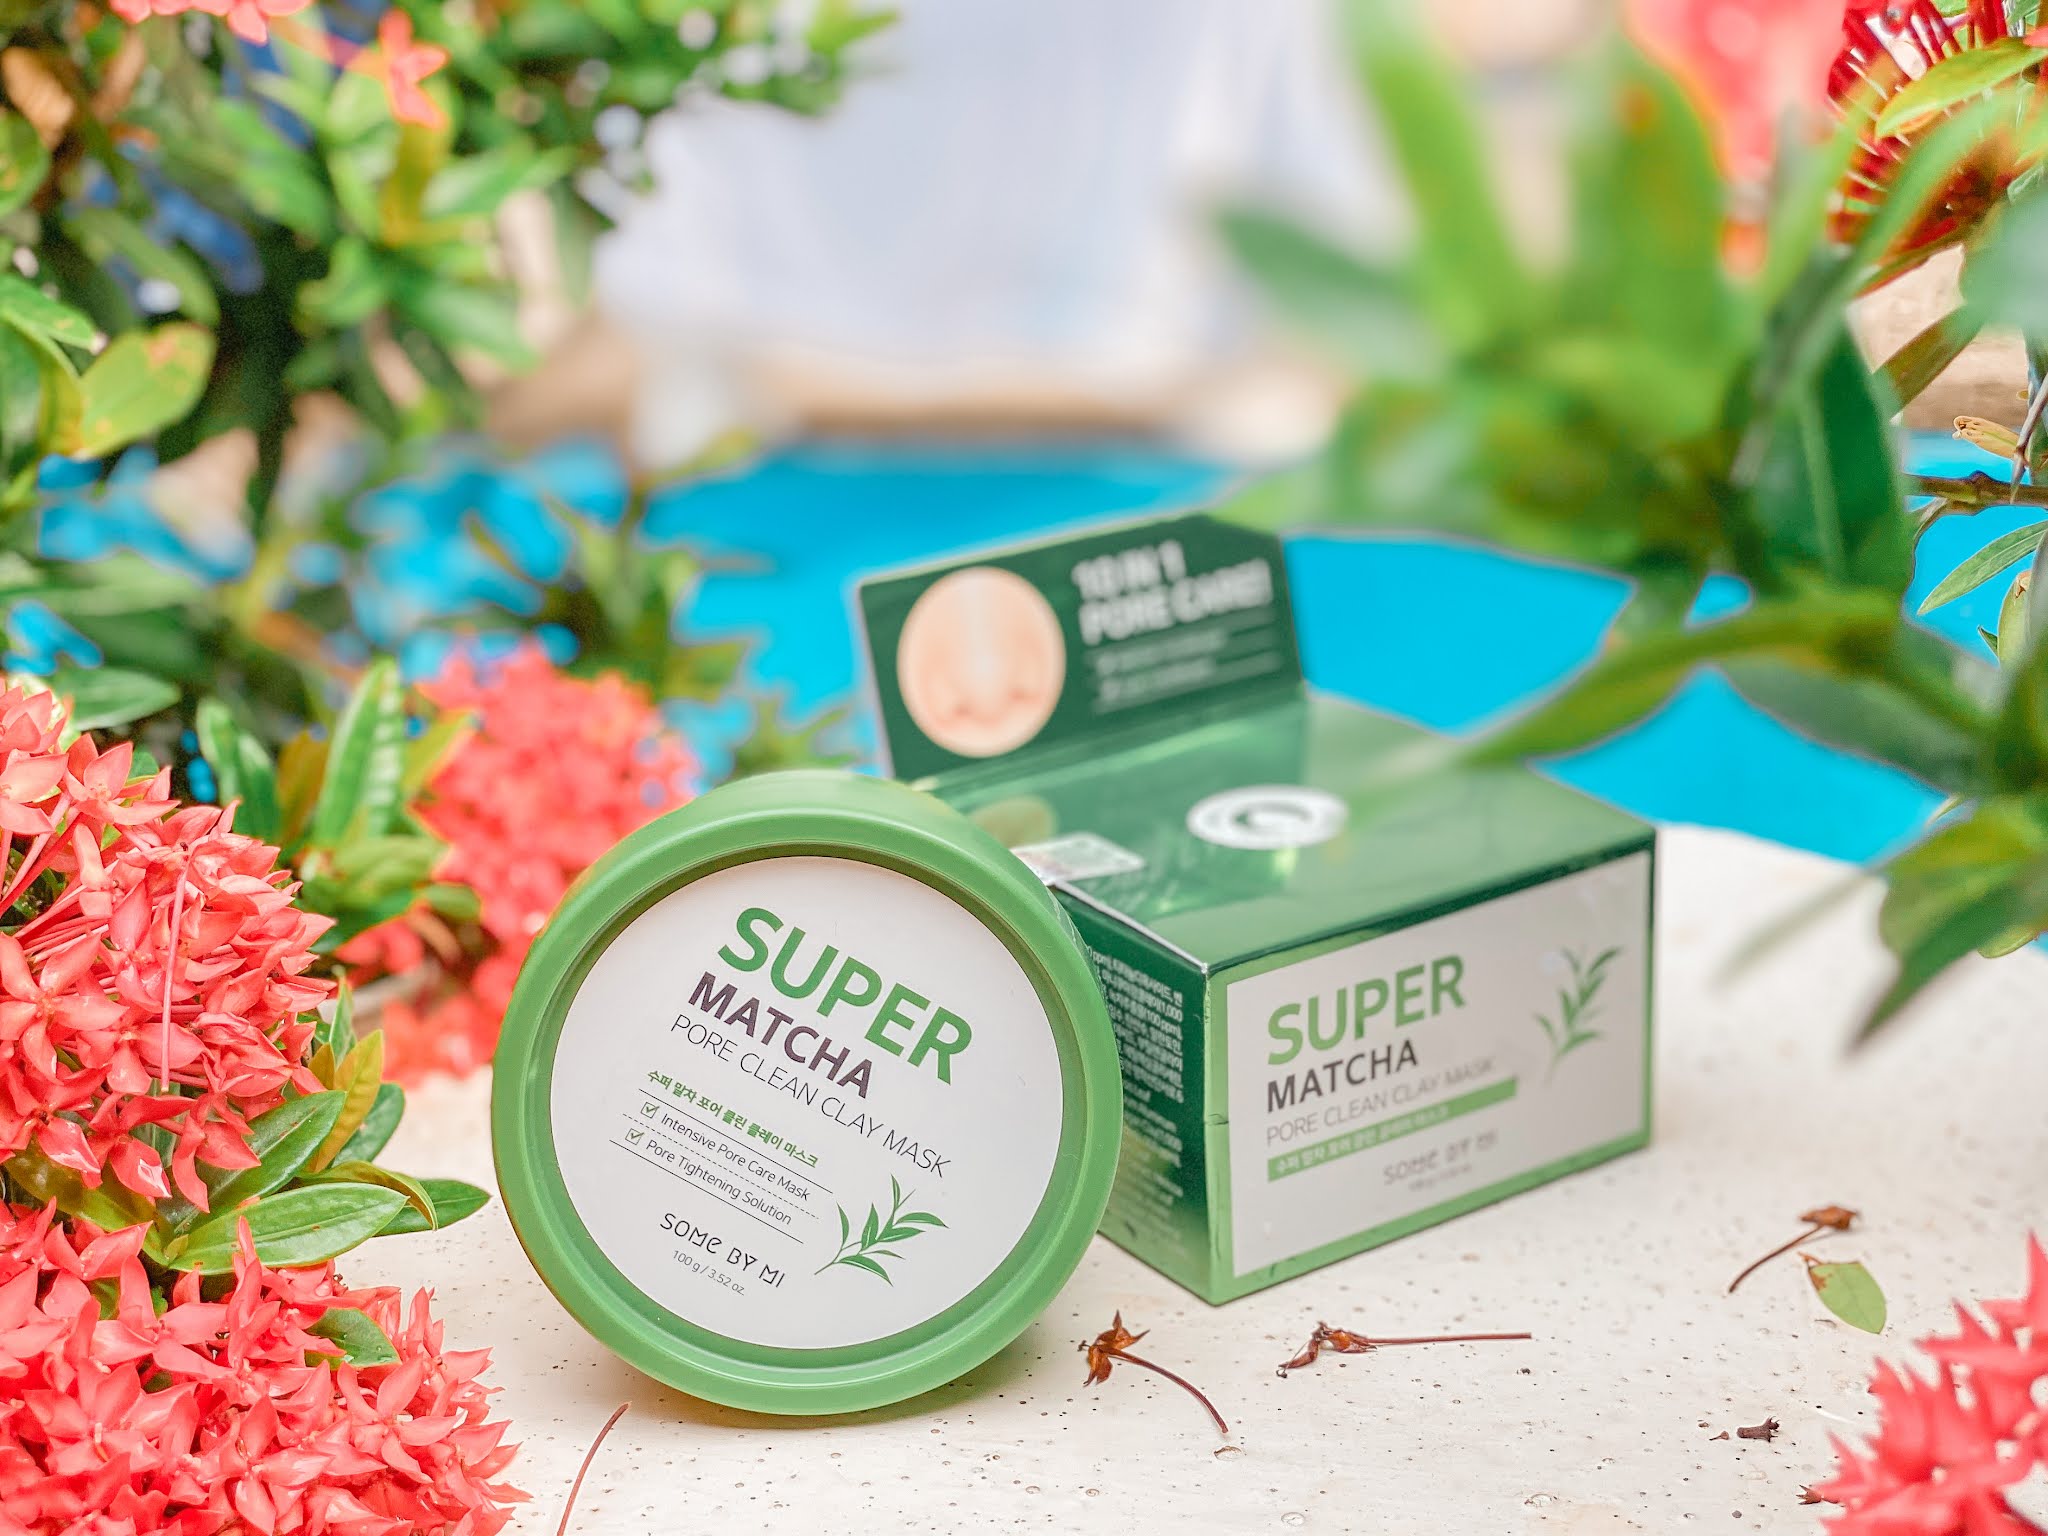 Skincare Test: Some By Mi Super Matcha Pore Clean Clay Mask